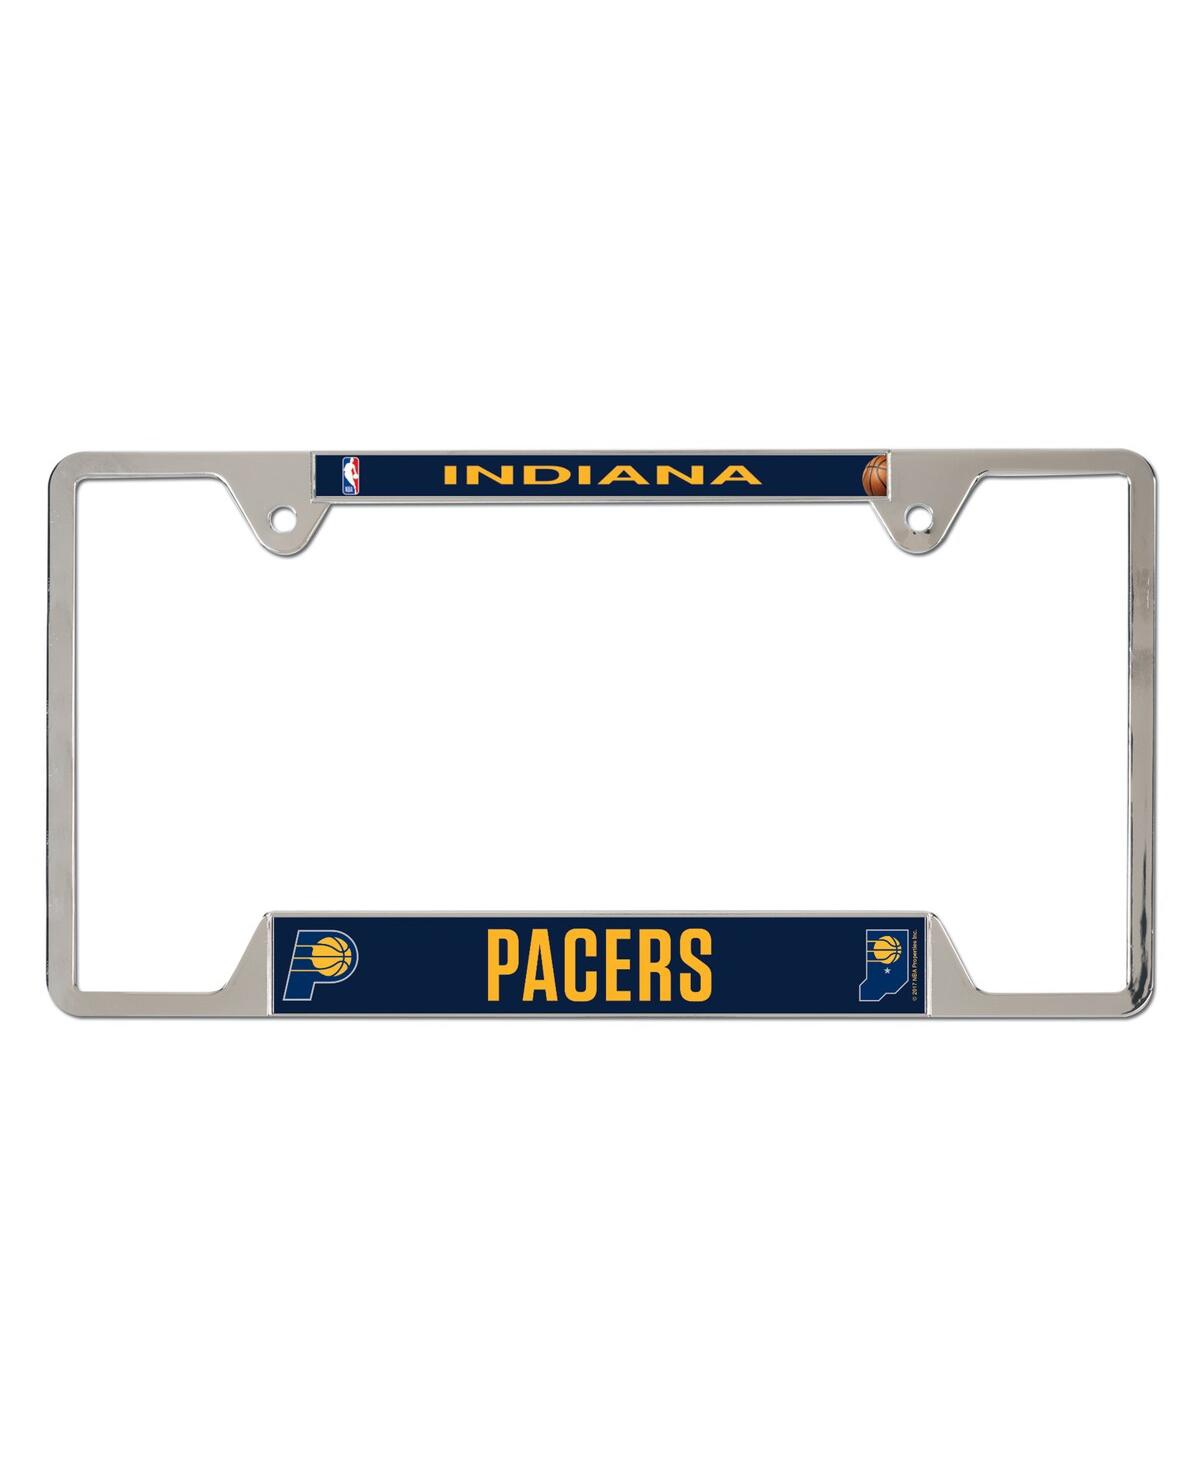 Wincraft Indiana Pacers License Plate Frame In Multi